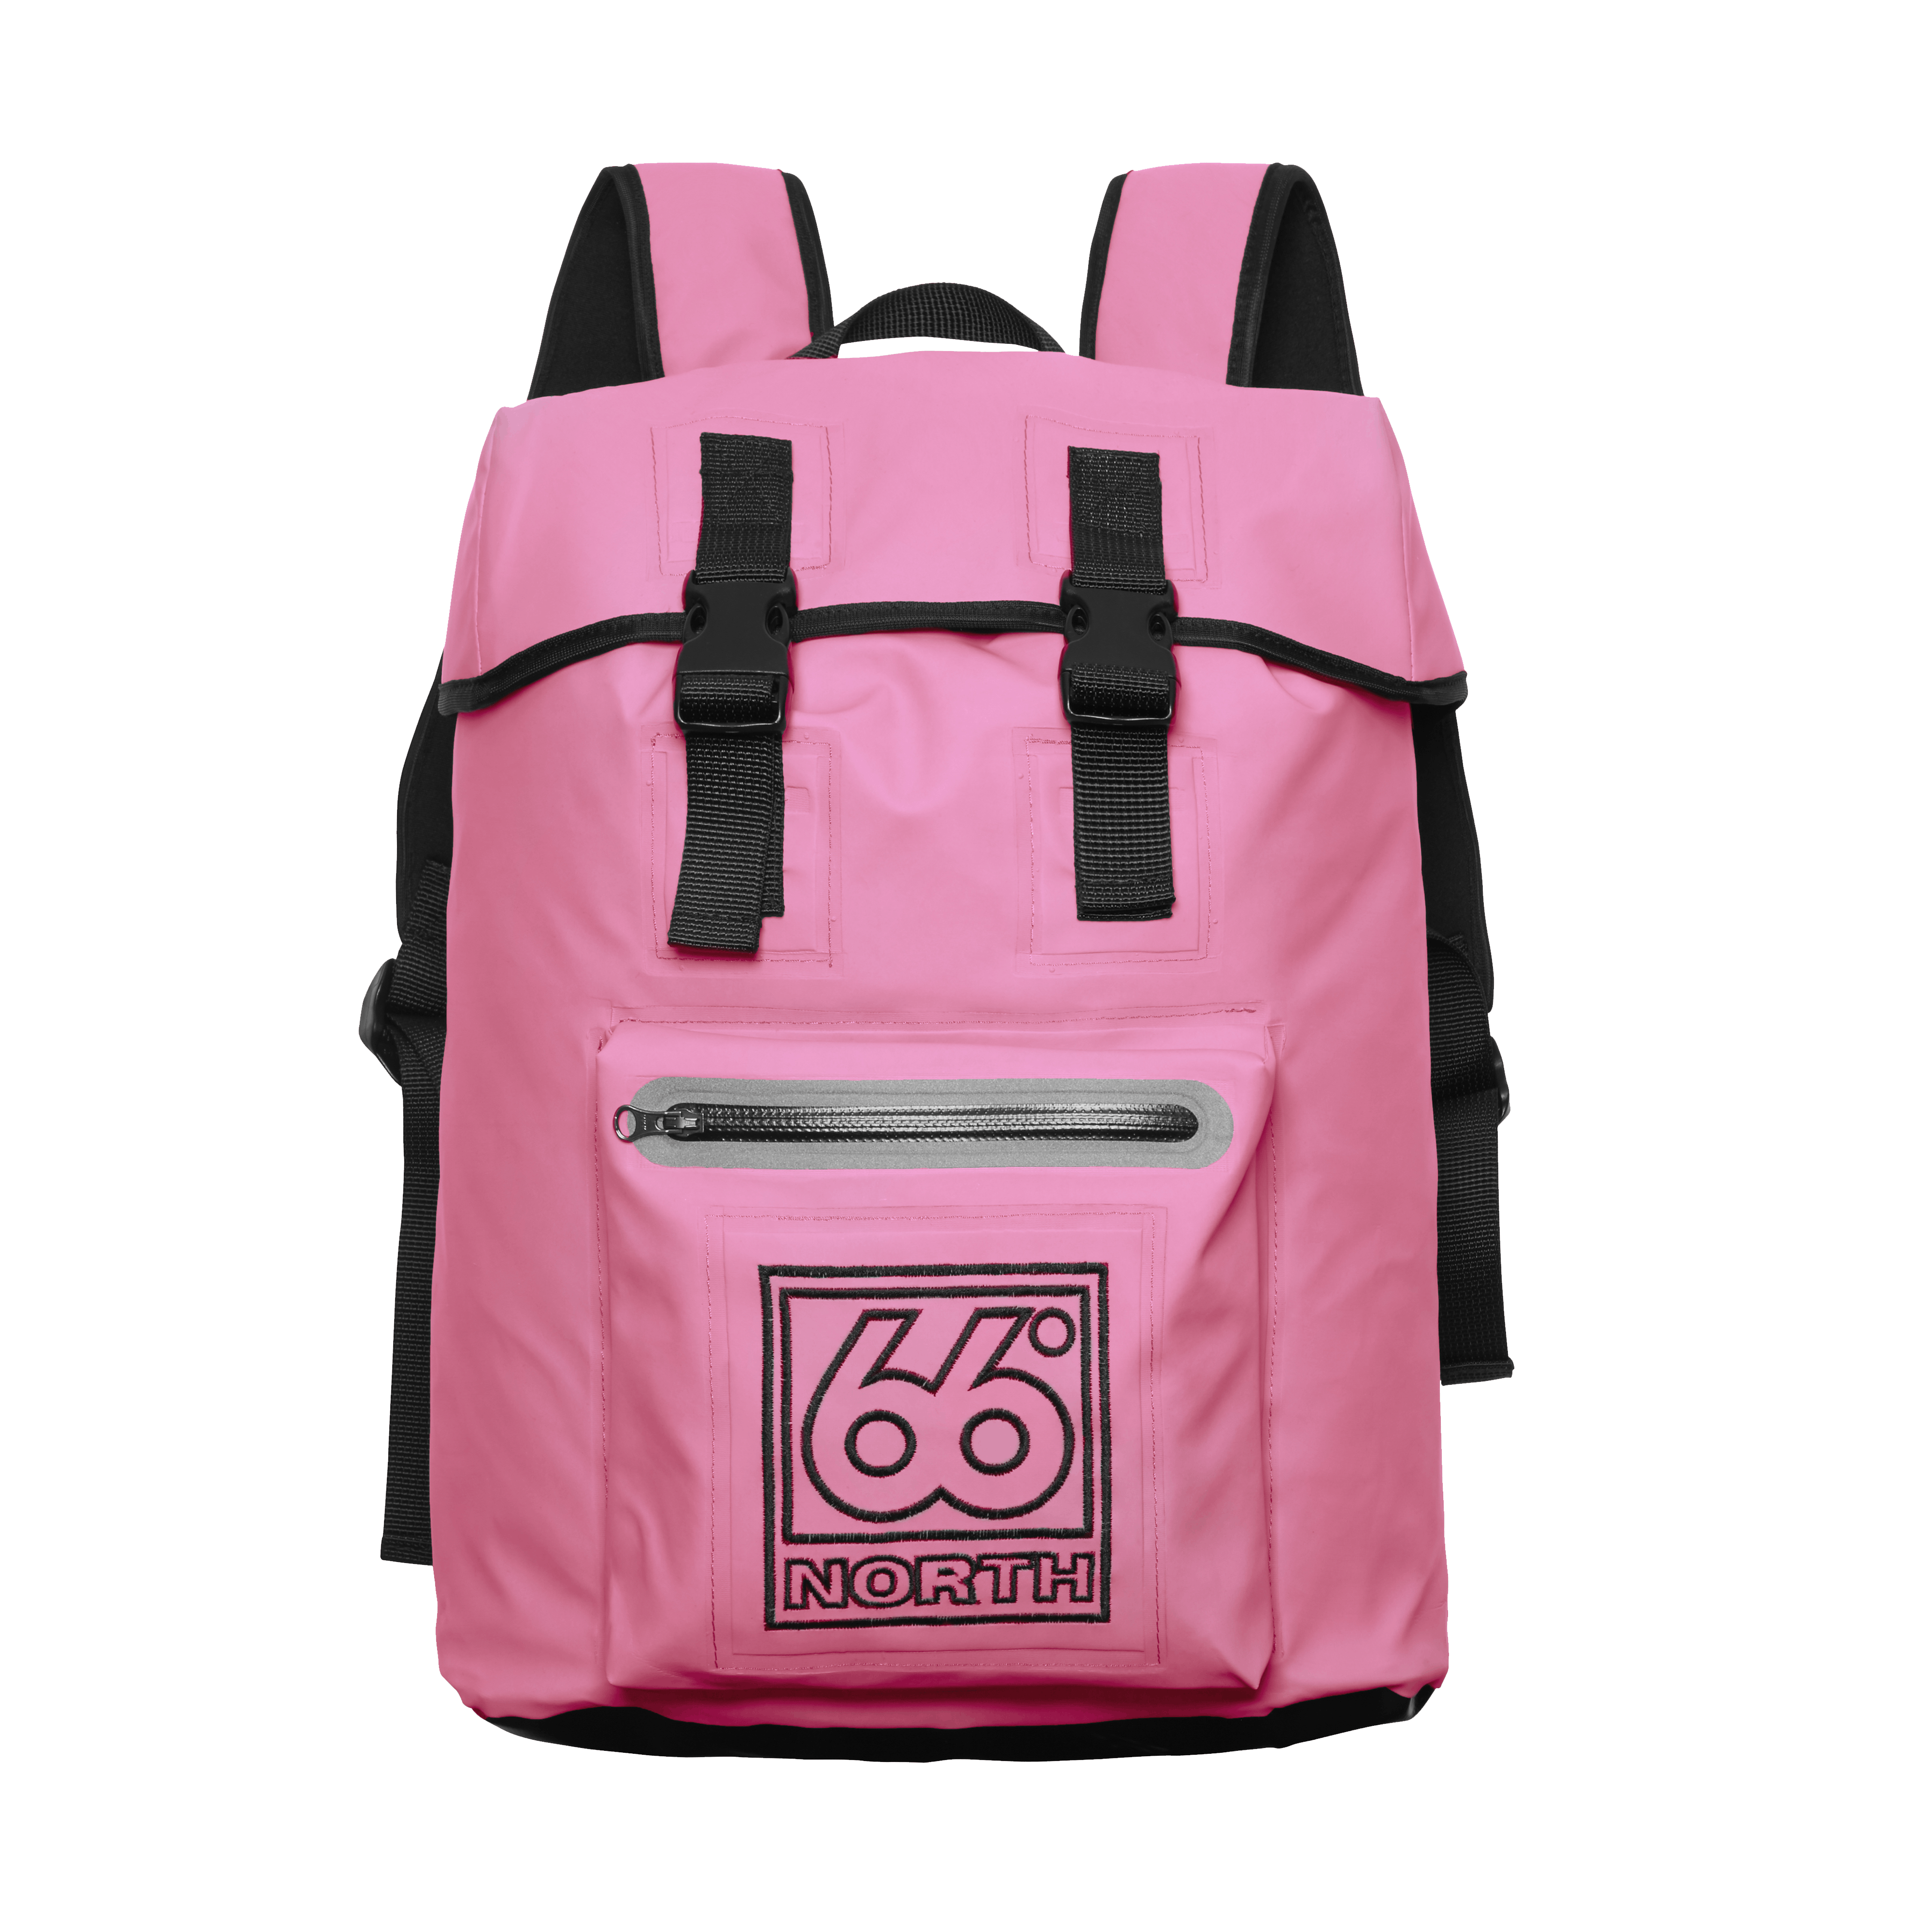 66 NORTH WOMEN'S BACKPACK ACCESSORIES - PINK - ONE SIZE,U99164